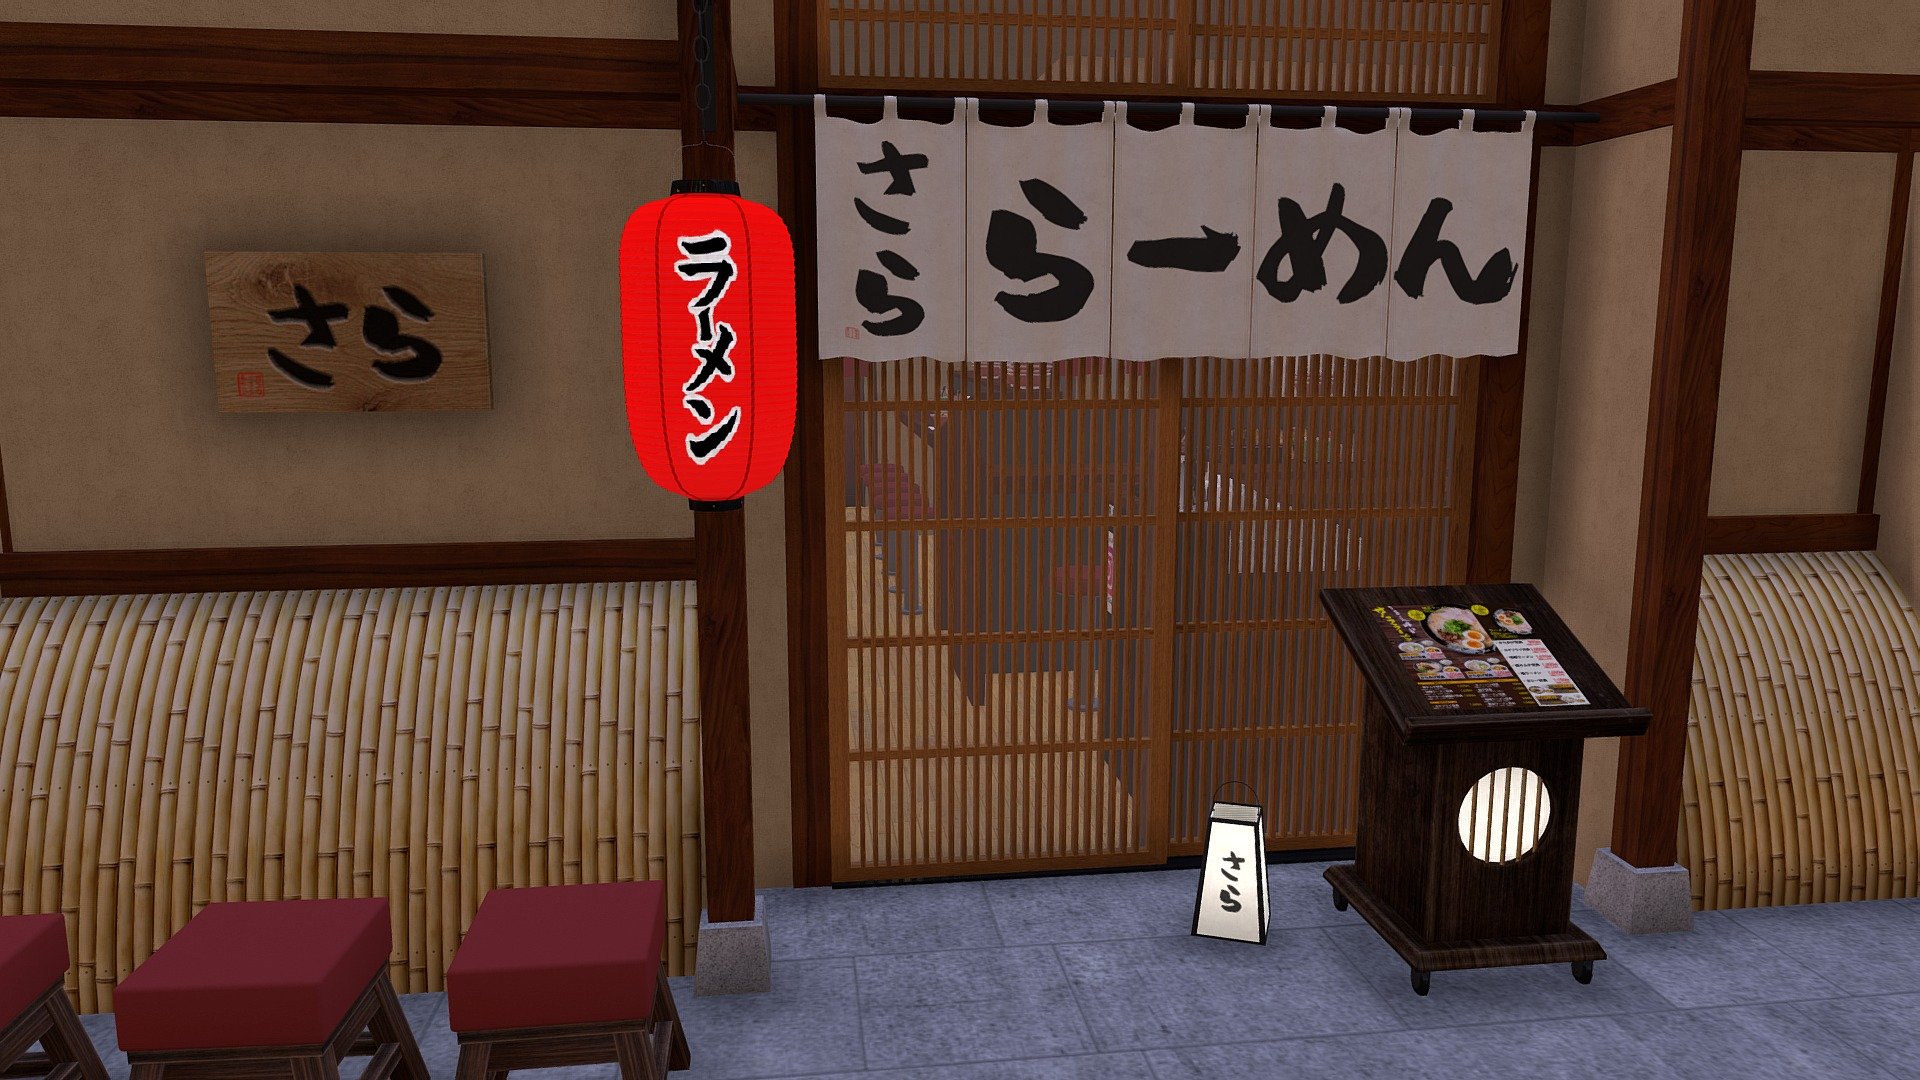 Ohisashiburi (Long time no see in Japanese). For the people who are trying to learn Japanese, here is my third and probably last model for the “Learn Japanese in 3d” project.

“Authentic Japanese Ramen shop”. (ramenya ラーメン屋)

Due to the birth of my lovely little girl, I had little to no time every day to work on this and in turn spent waaaay too long on this project. The result is disappointing. But oh well, as always I hope people can pick up a Japanese word or two. 

Hope you like it.

Audio by H K! - 100% Authentic Japanese Ramen shop - 3D model by papigiulio 3d model